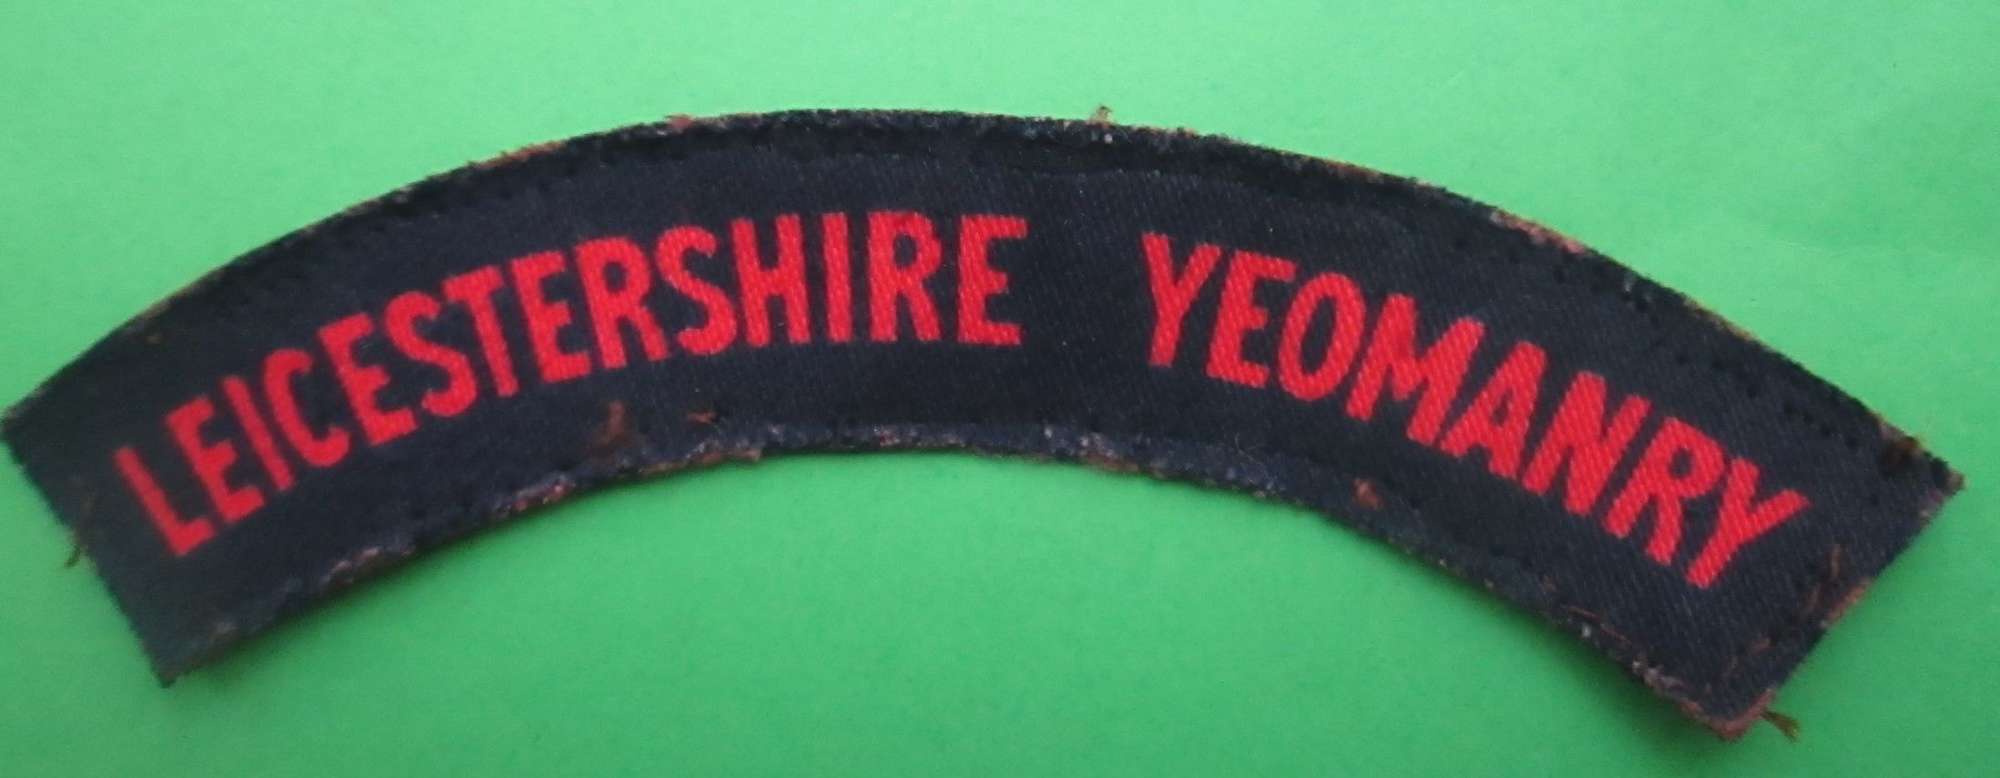 A LEICESTERSHIRE YEOMANRY SHOULDER TITLE